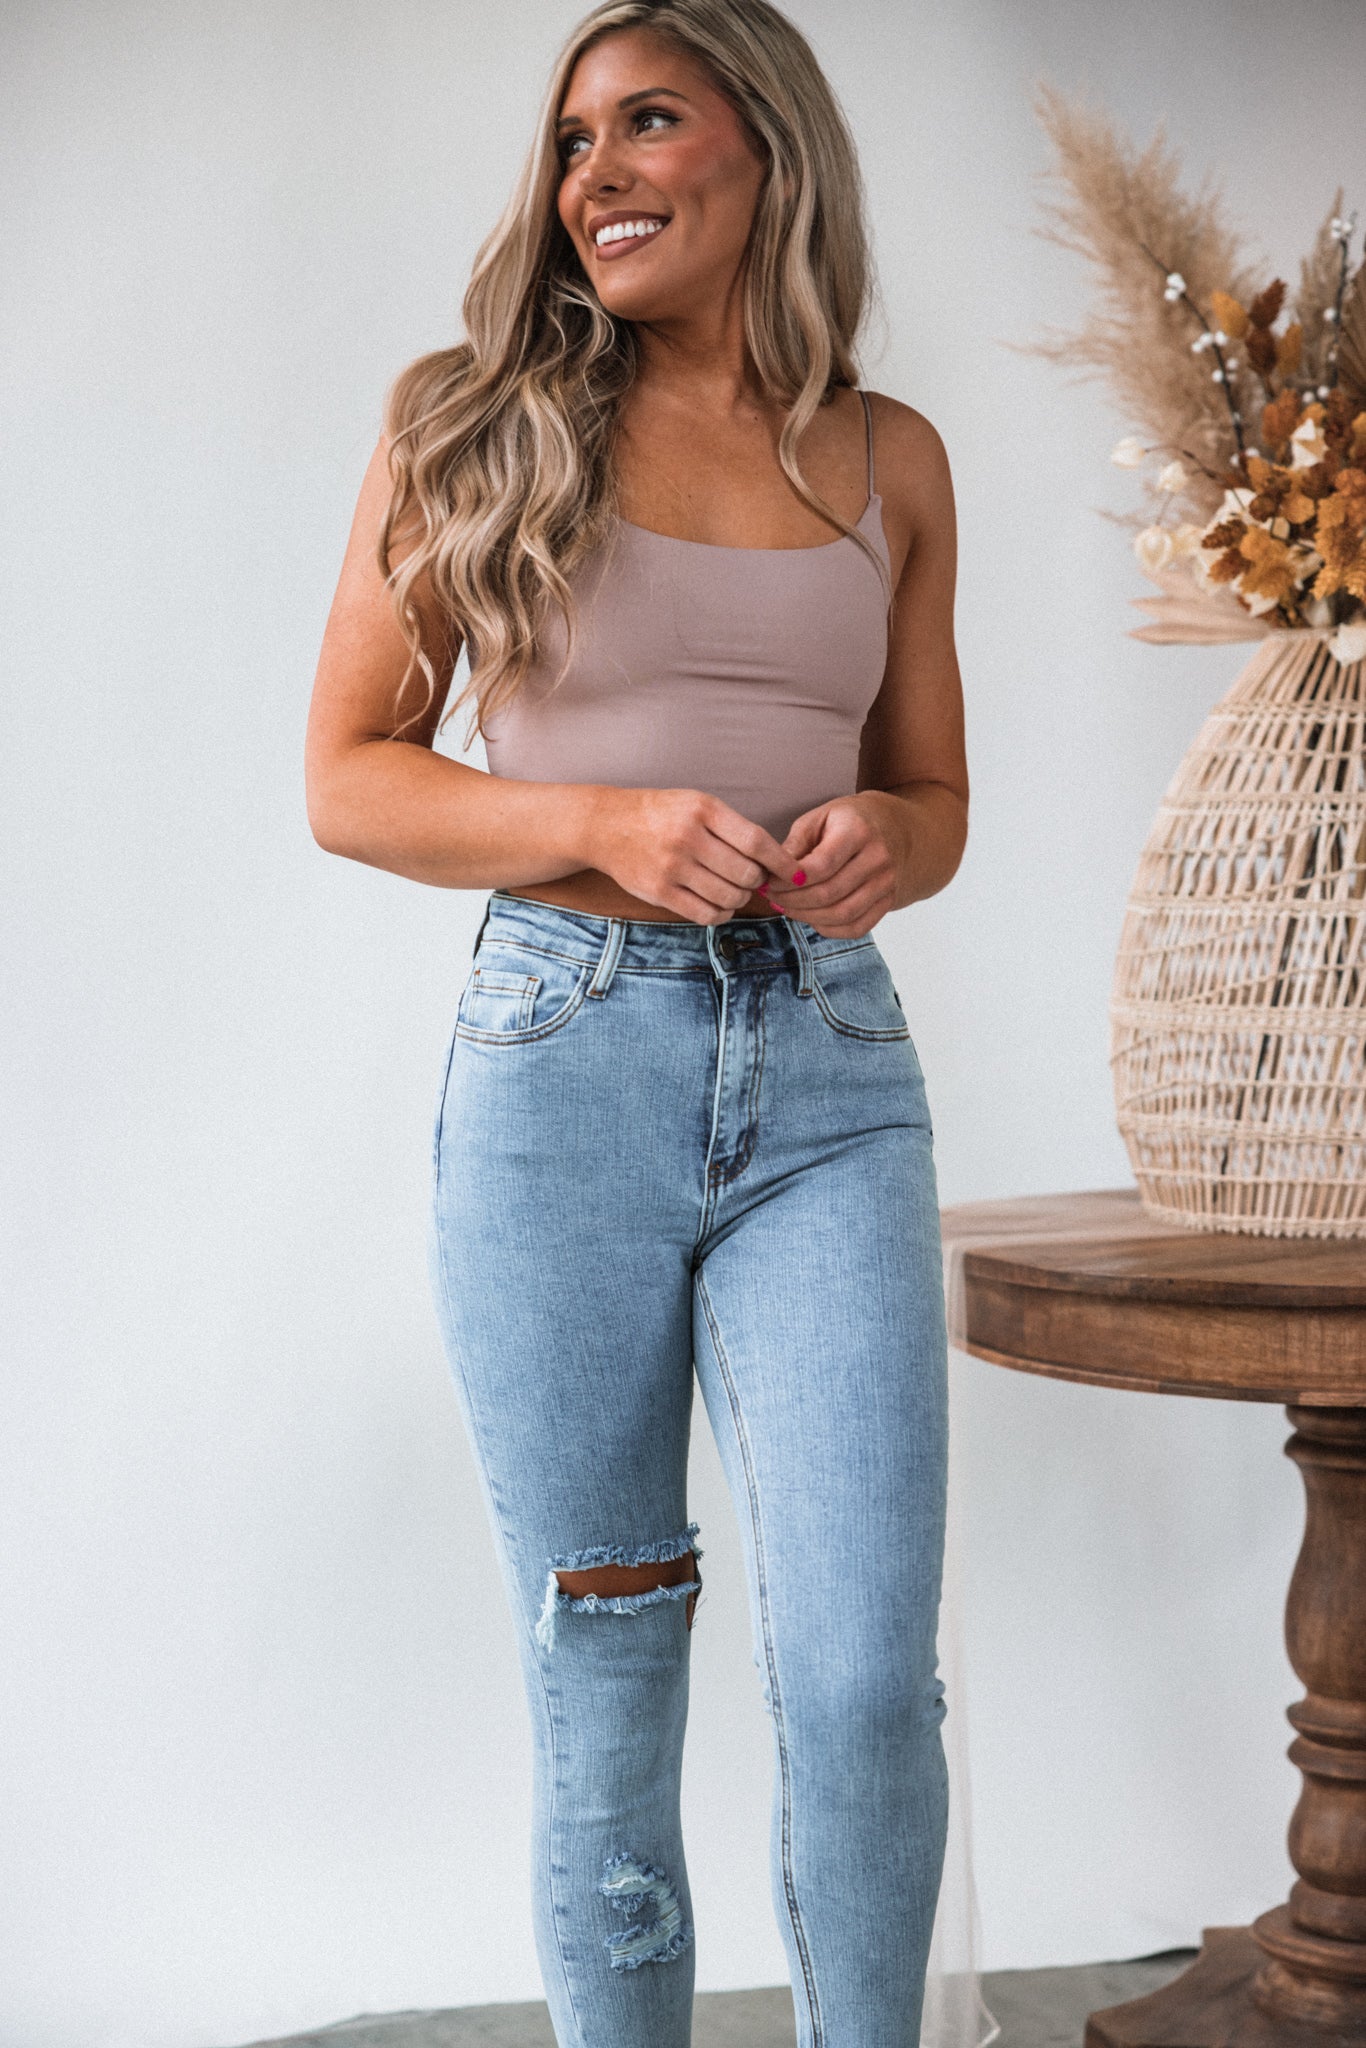 Paige Distressed Jeans